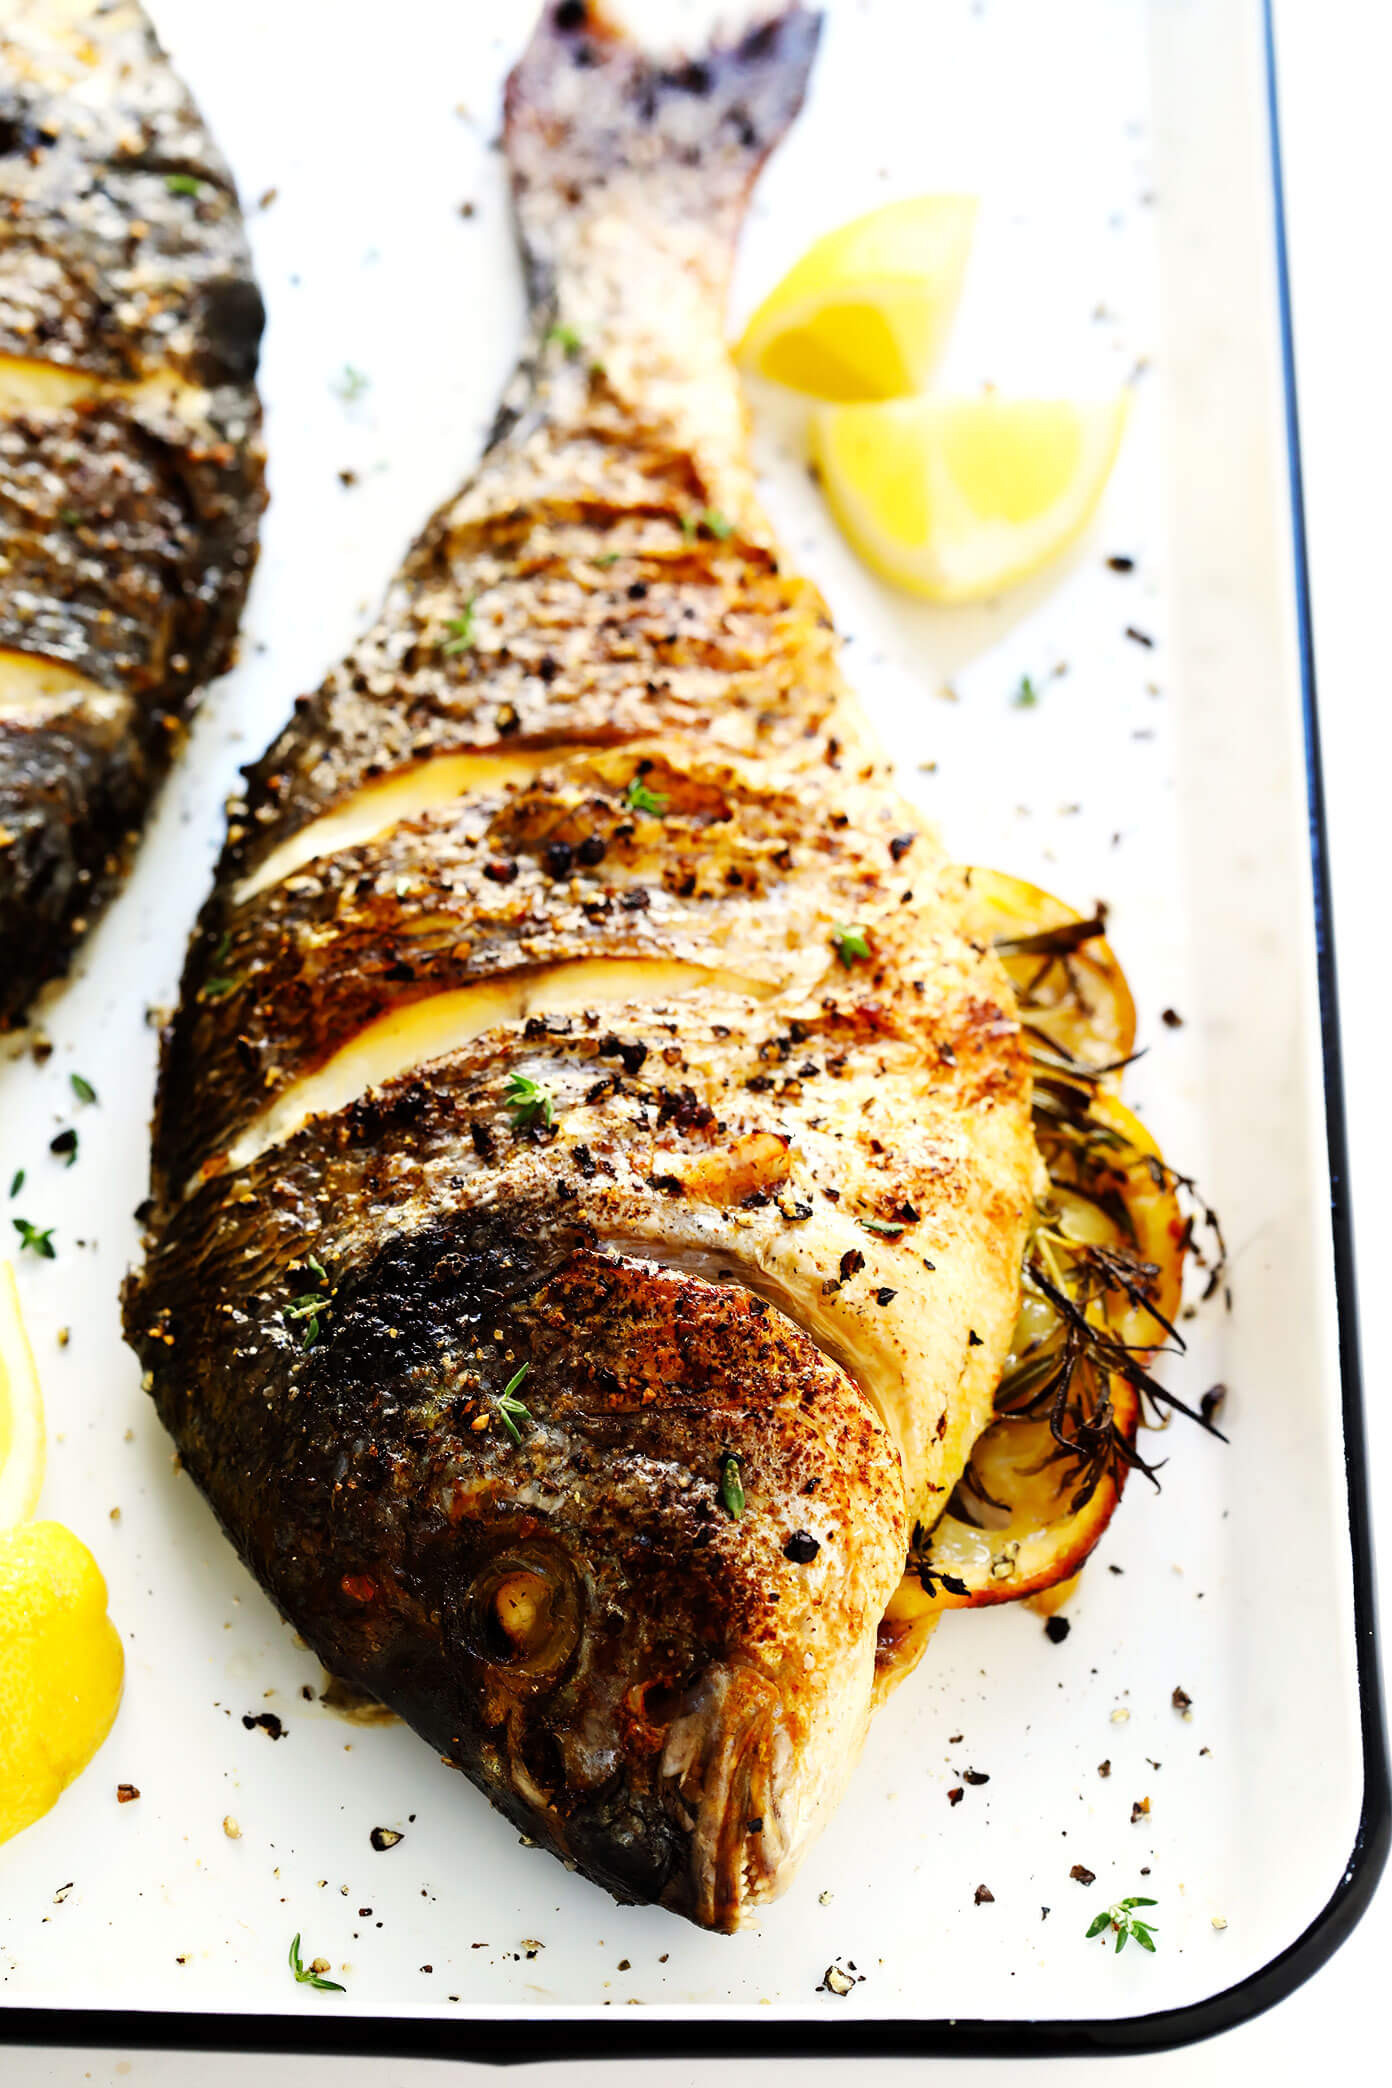 Stuffed Whole Fish Recipes
 How To Cook A Whole Fish